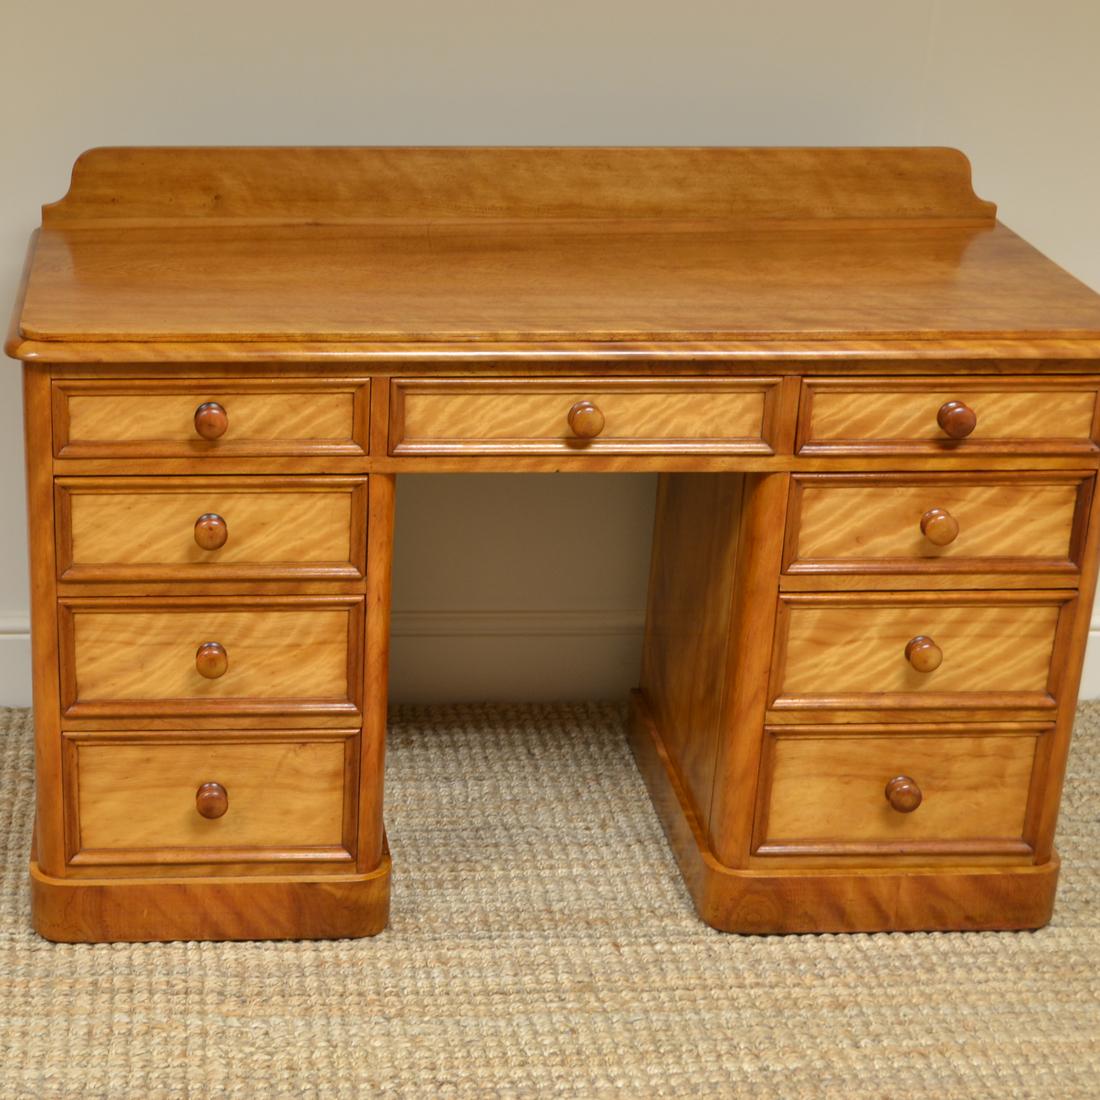 Unusual satin birch Victorian antique pedestal desk 
Dating from circa 1870 this Country House, unusual satin birch Victorian antique pedestal desk has a raised back above a moulded top with central drawer over kneehole. Each pedestal has four